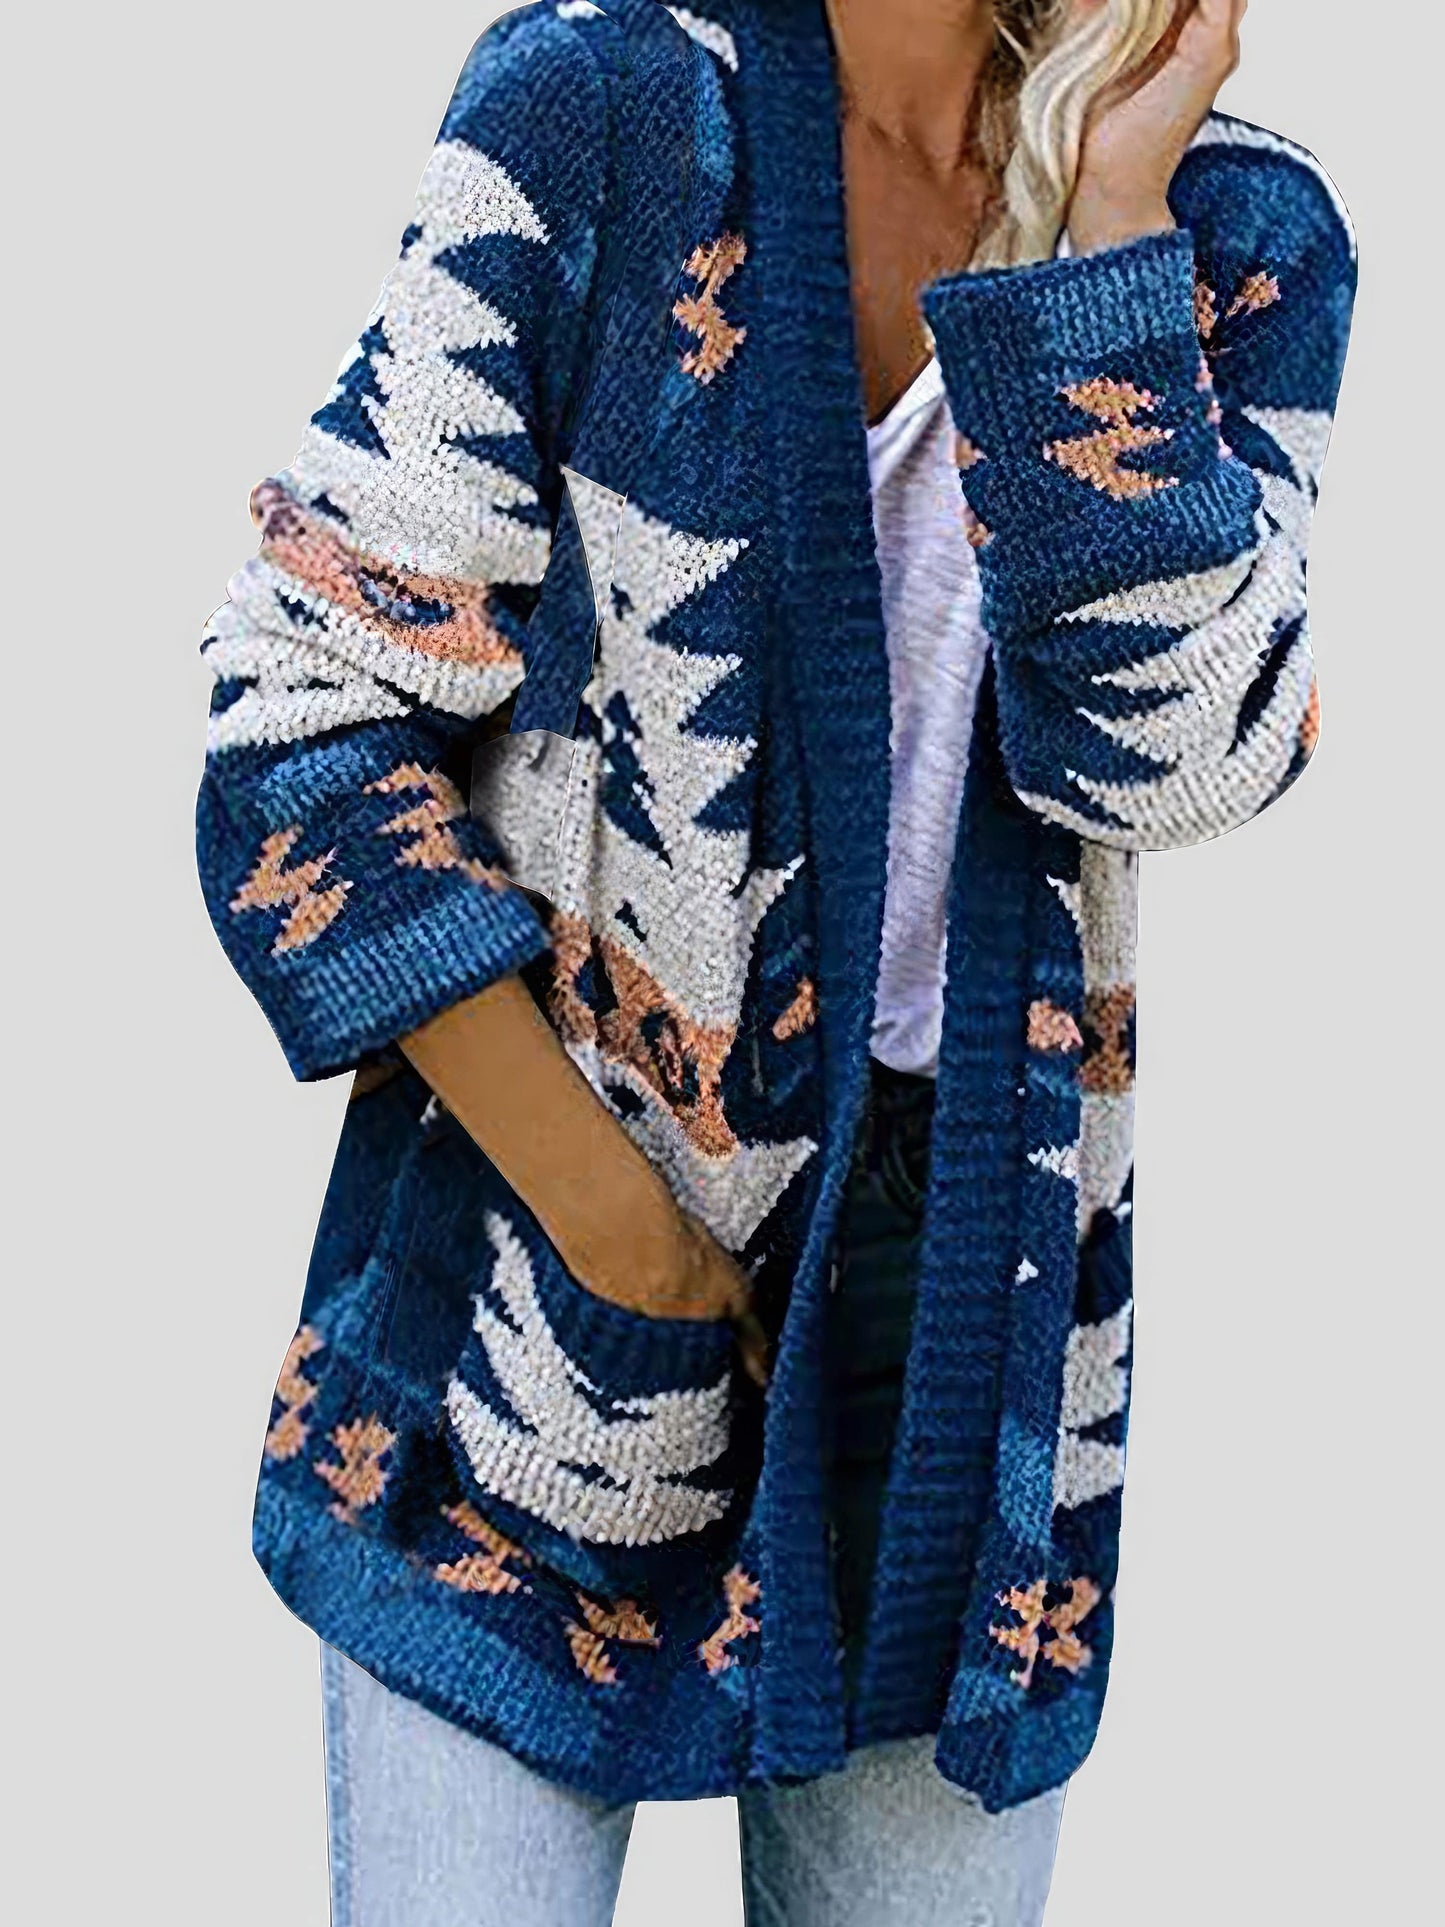 MsDressly Cardigans Printed Pocket Casual Long Sleeve Knitted Cardigan